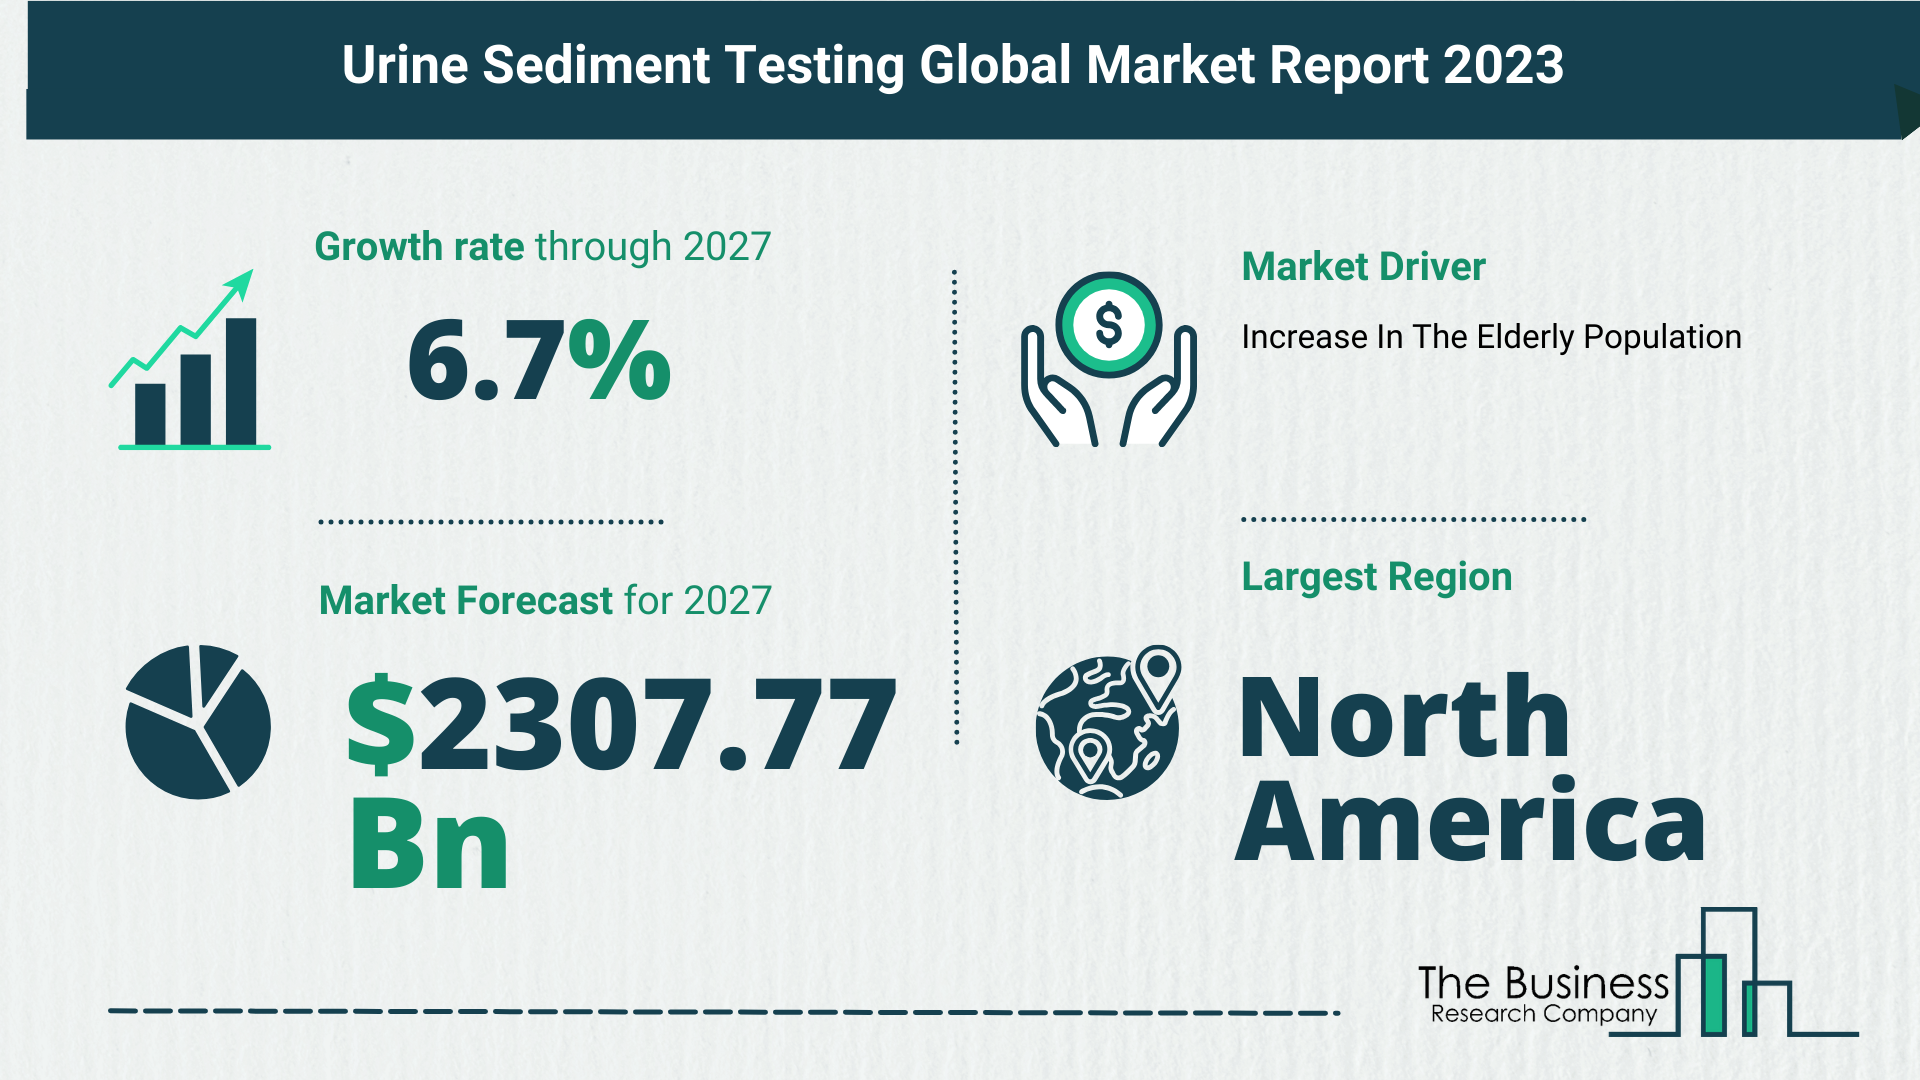 Top 5 Insights From The Urine Sediment Testing Market Report 2023